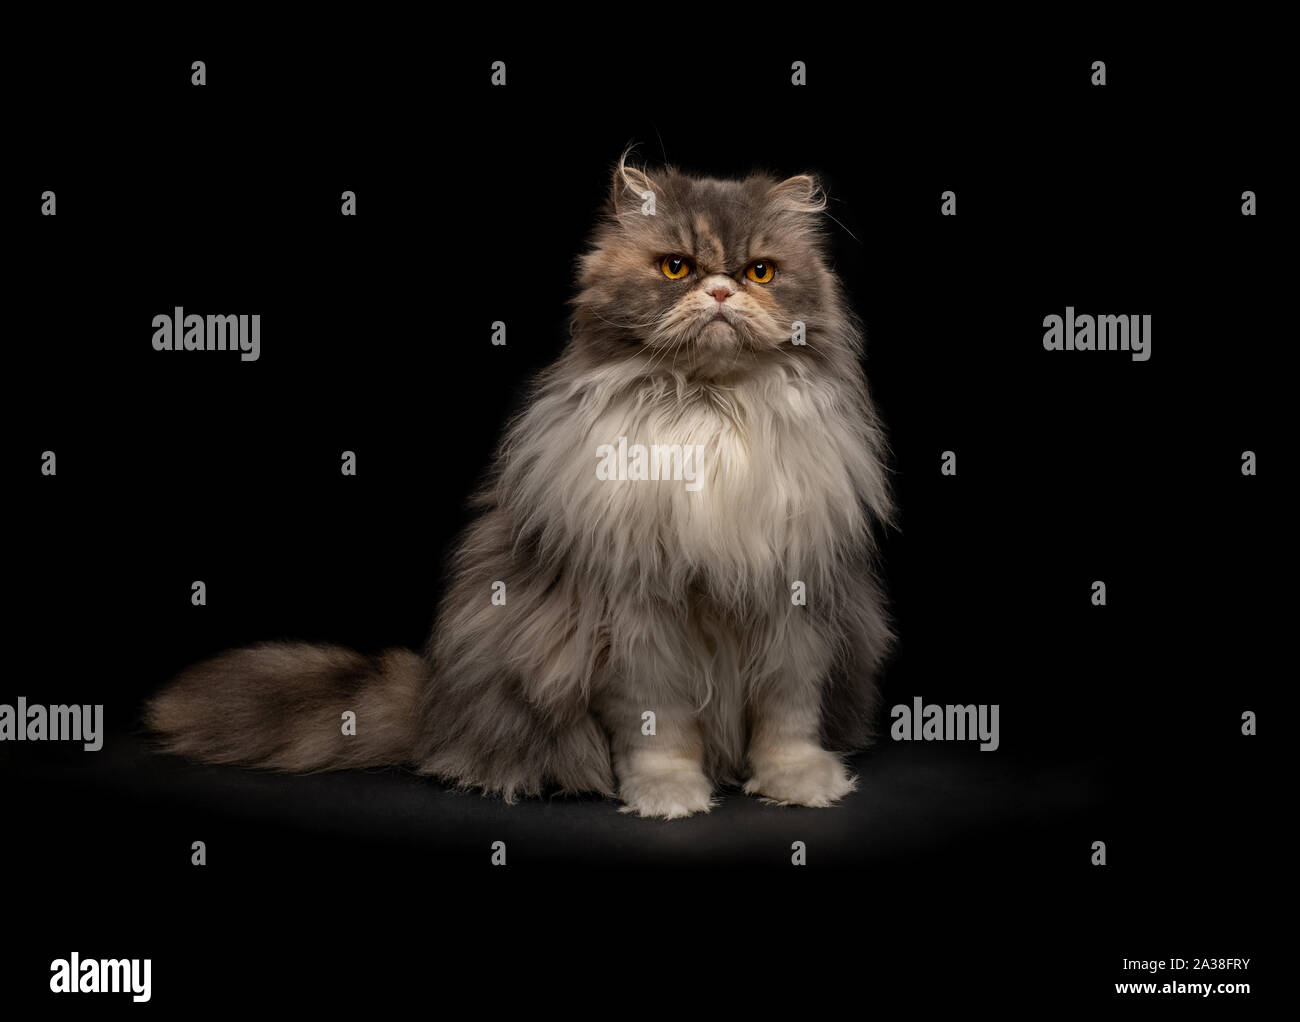 Portrait of a fluffy cat Stock Photo